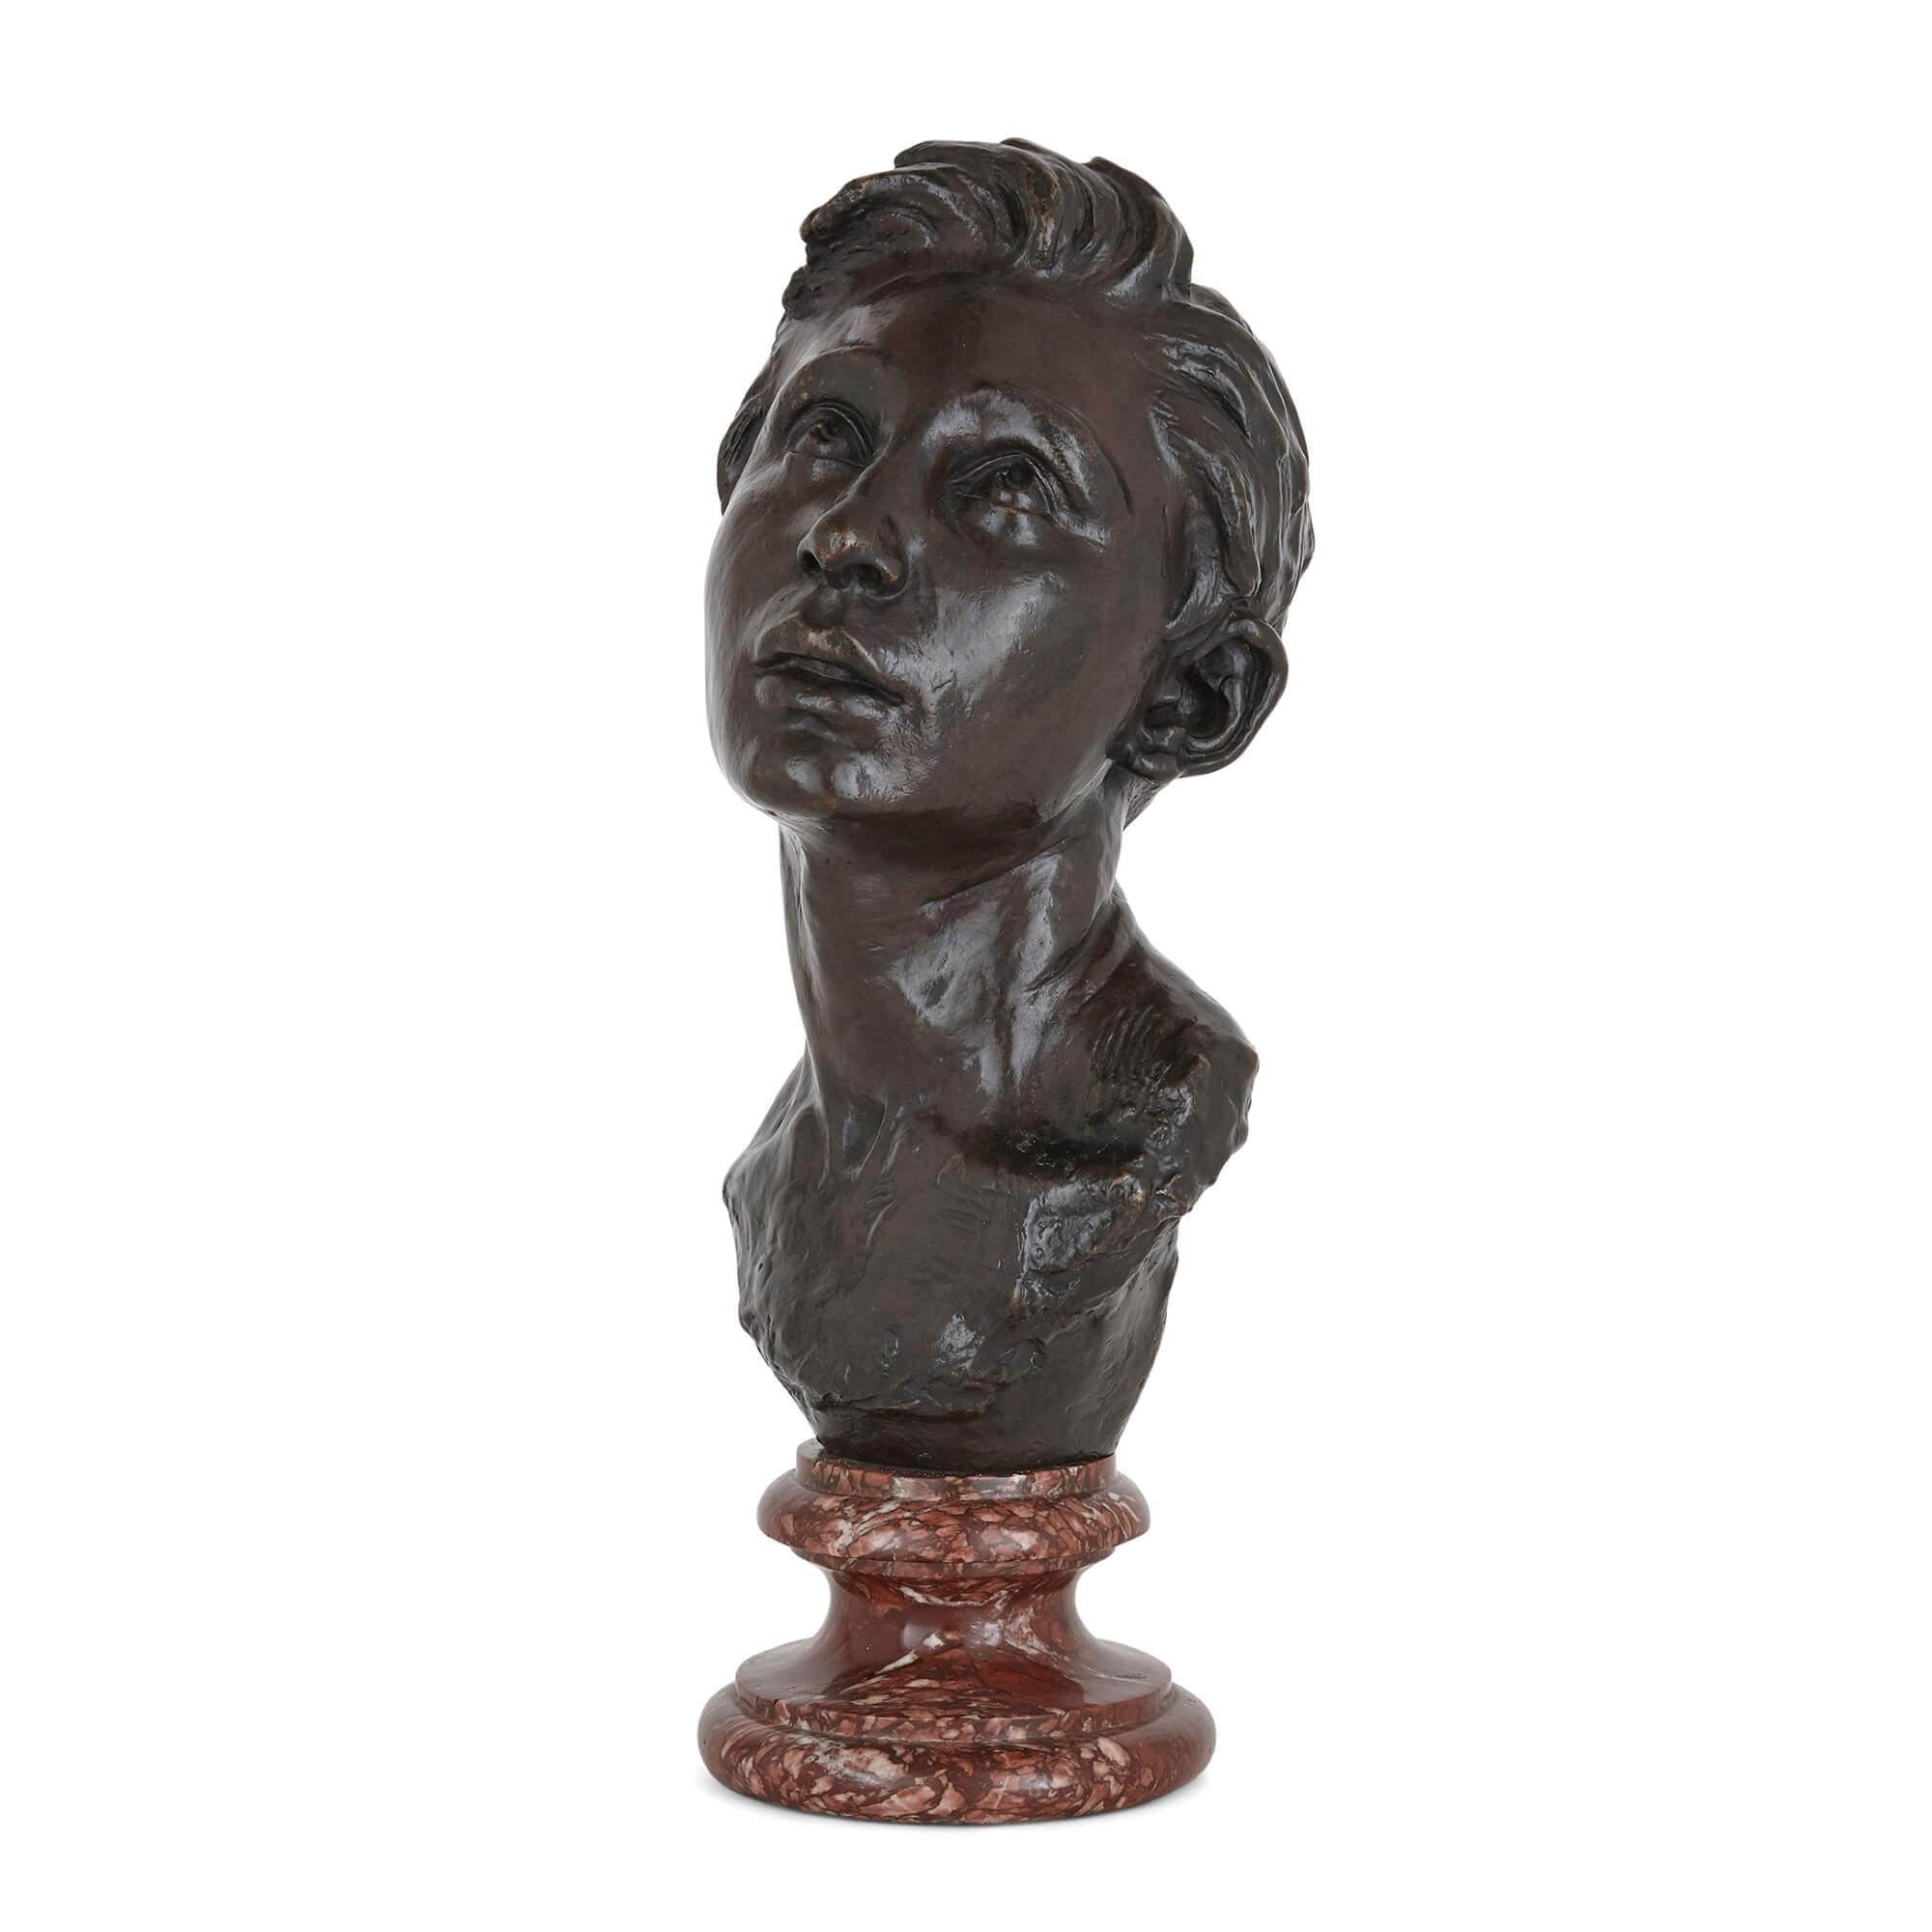 French bronze sculpture bust of a man by Aimé-Jules Dalou
French, 1888
Measures: height 49cm, width 20cm, depth 21cm

This fine patinated bronze bust by the French sculpture Dalou portrays a young, idealistically beautiful man. The sitter gazes